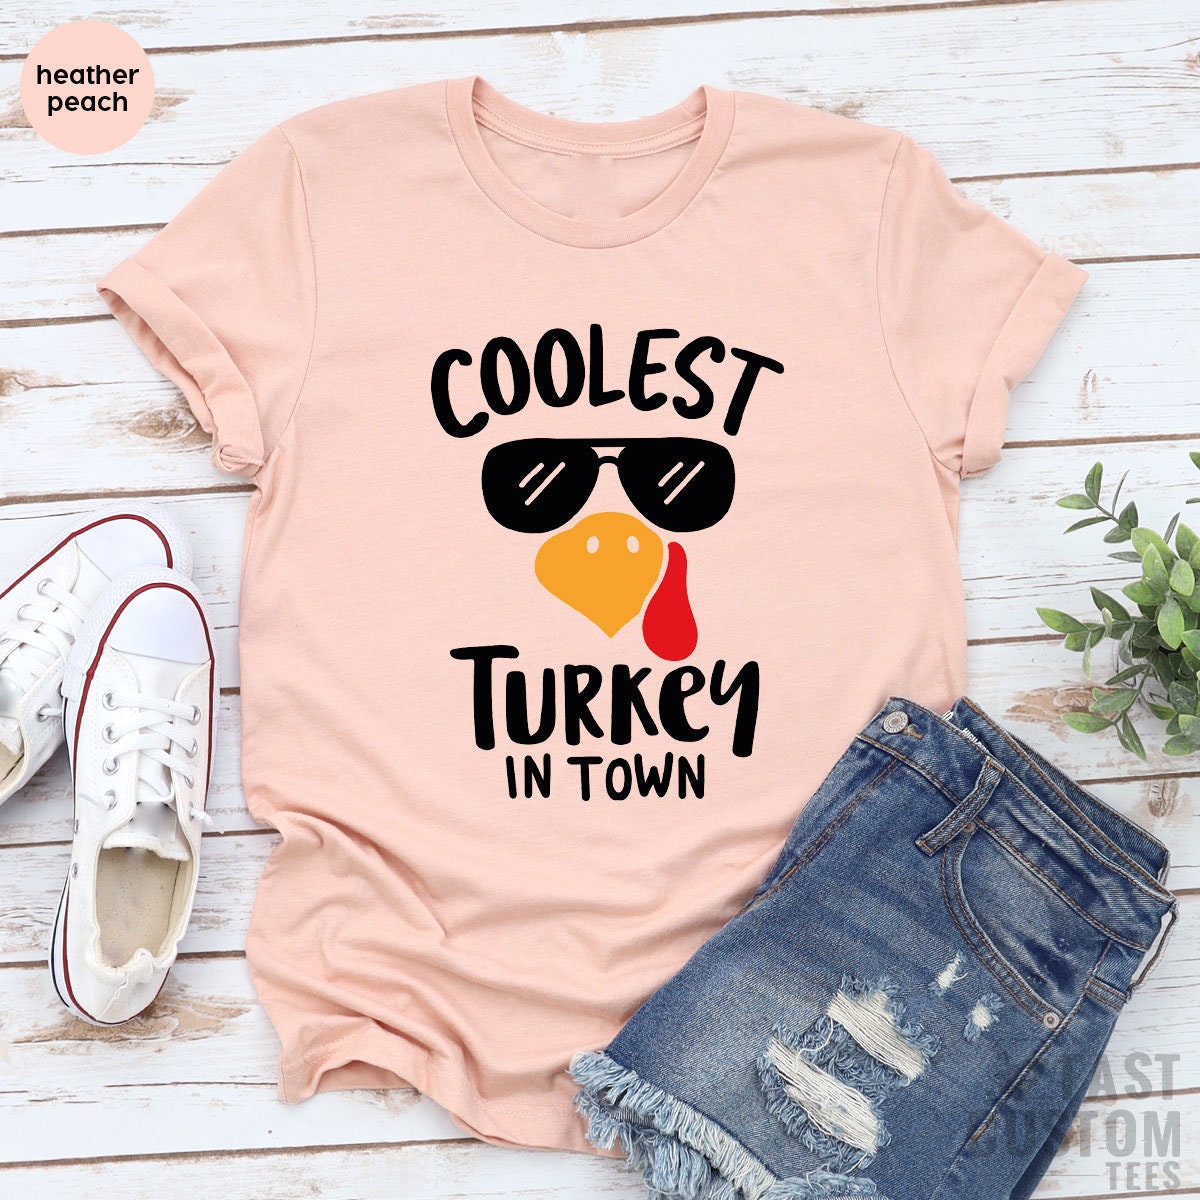 Coolest Turkey in Town Shirt, Thanksgiving Shirt, Funny Thanksgiving Tee, Fall Thankful Shirt, Thankful Shirts For Women, Family Matching - Fastdeliverytees.com